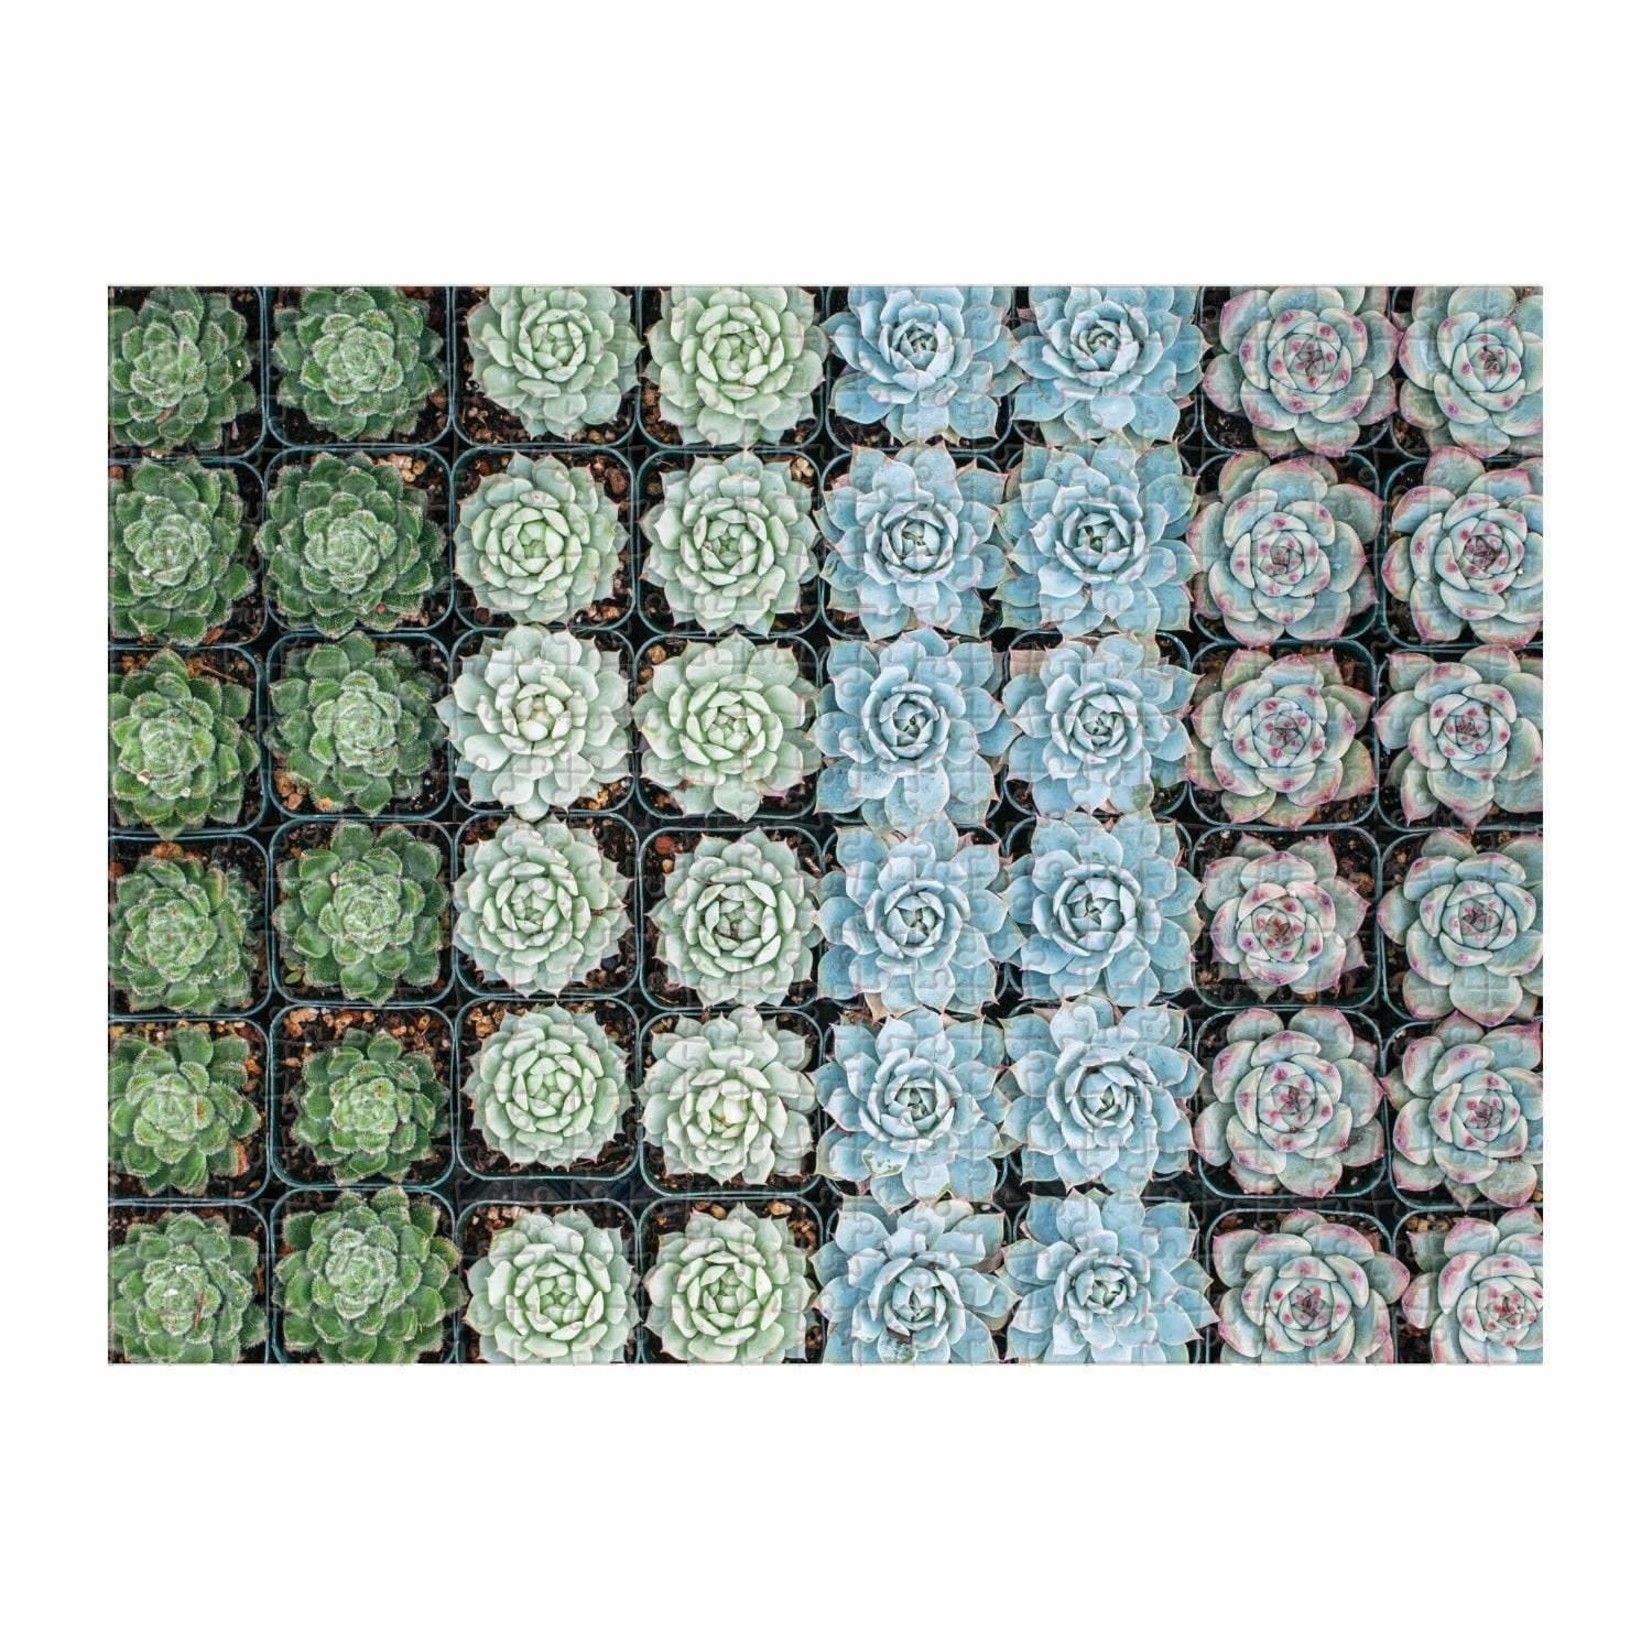 galison Succulent Garden Double-Sided 500 Piece Jigsaw Puzzle